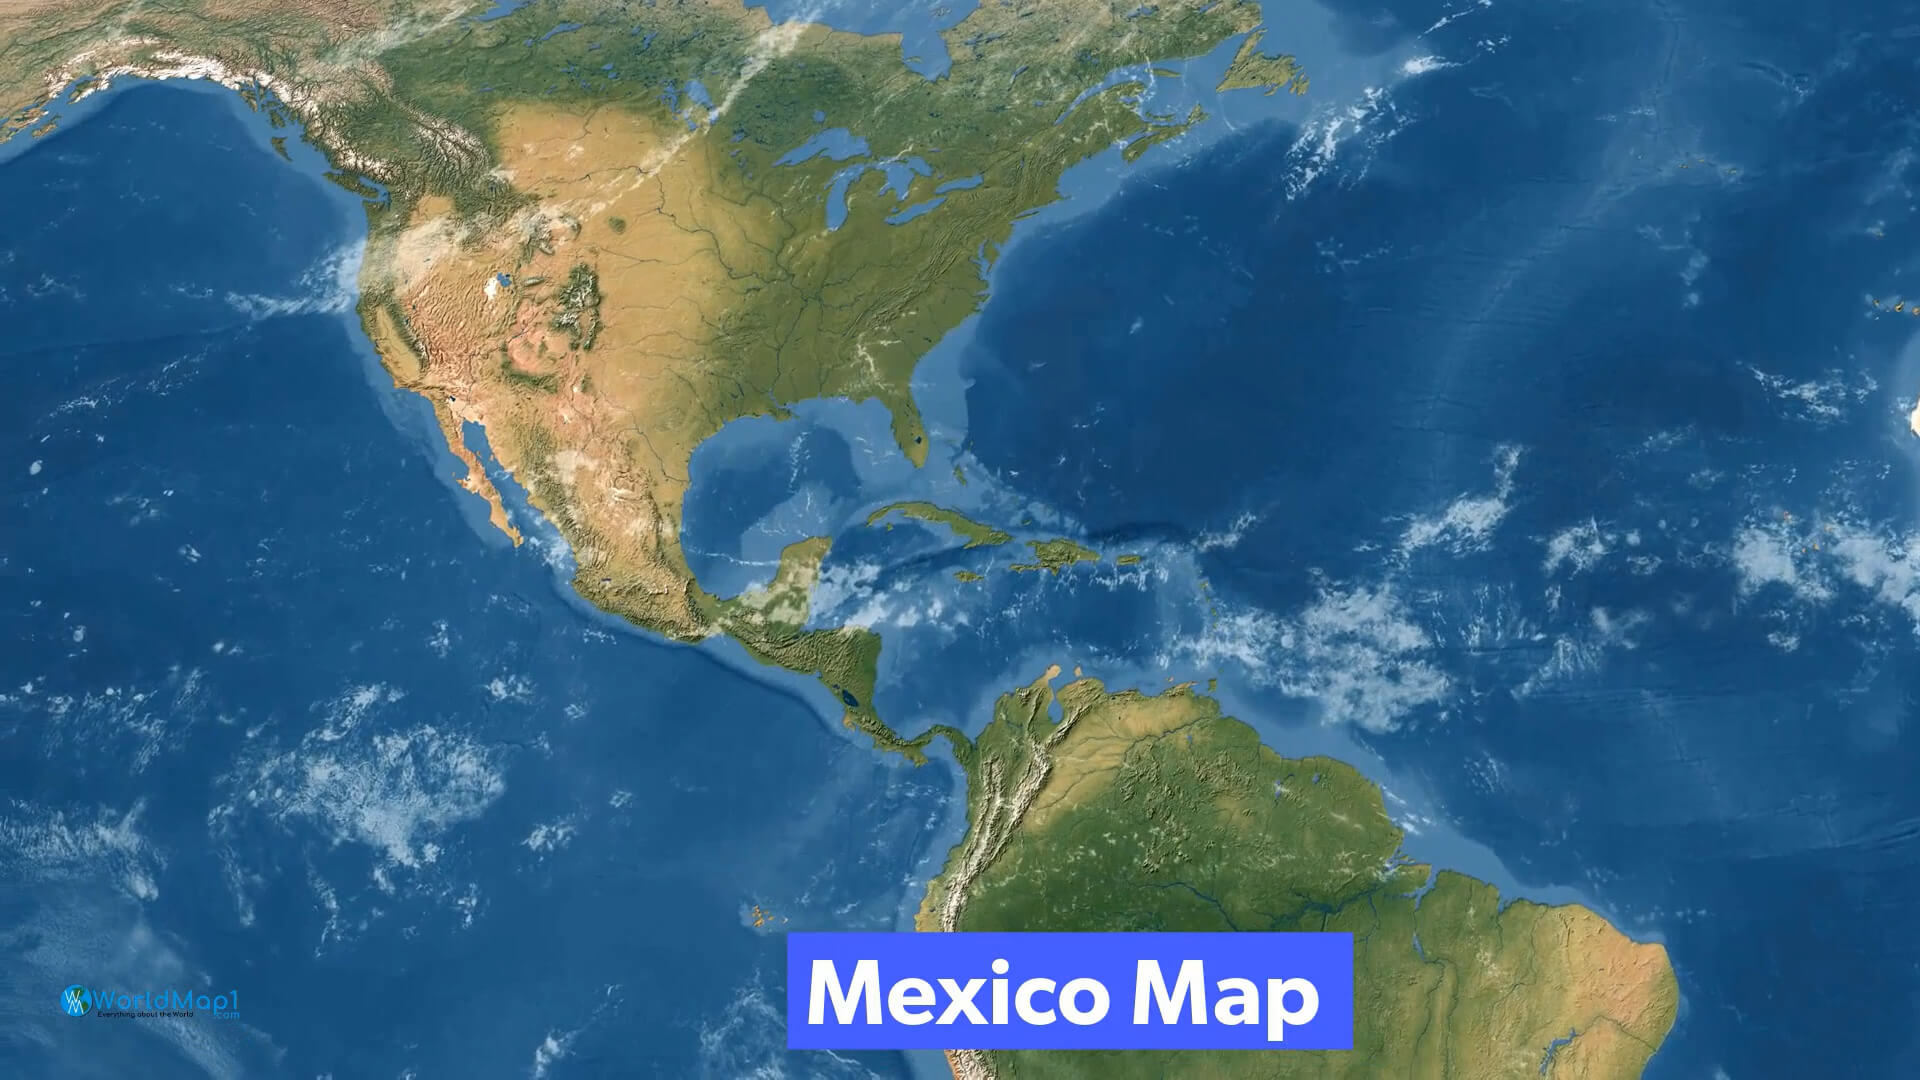 Mexico and USA Satellite View